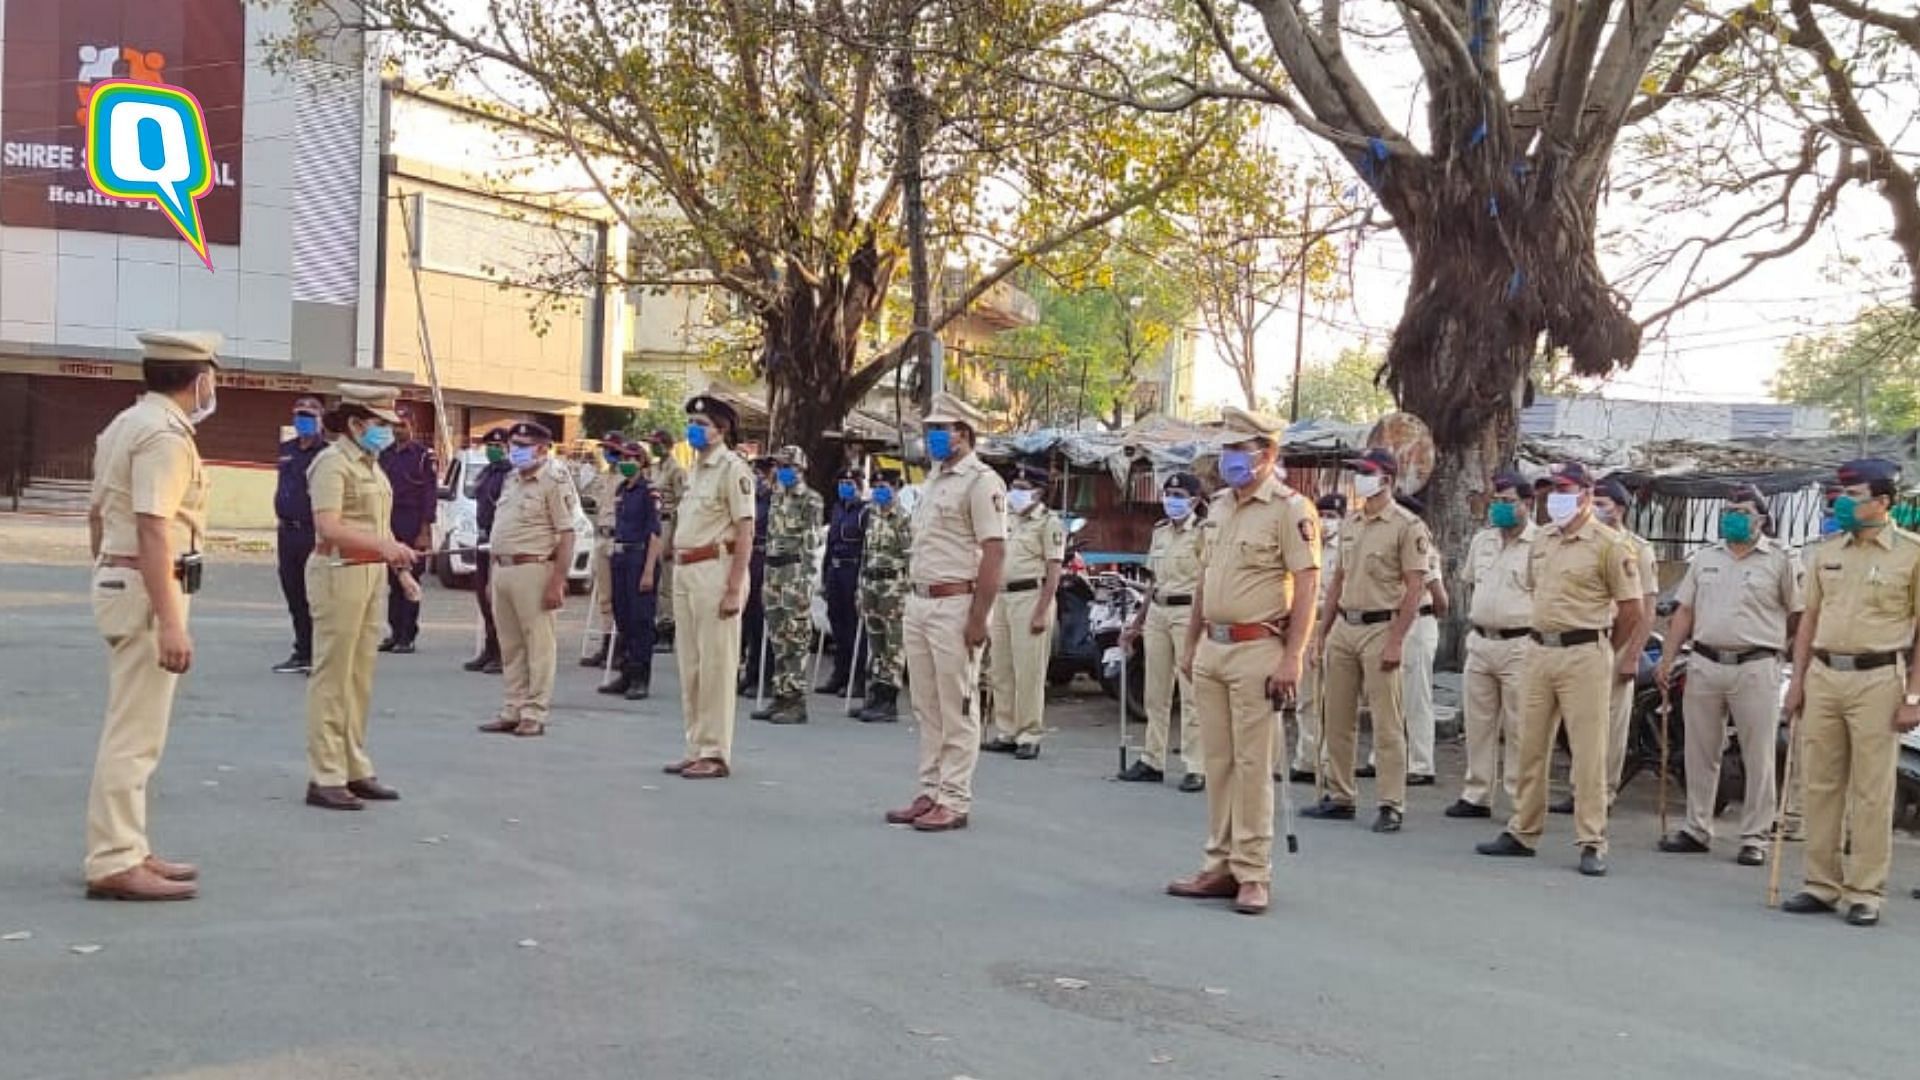 Nagpur Police on their route march.